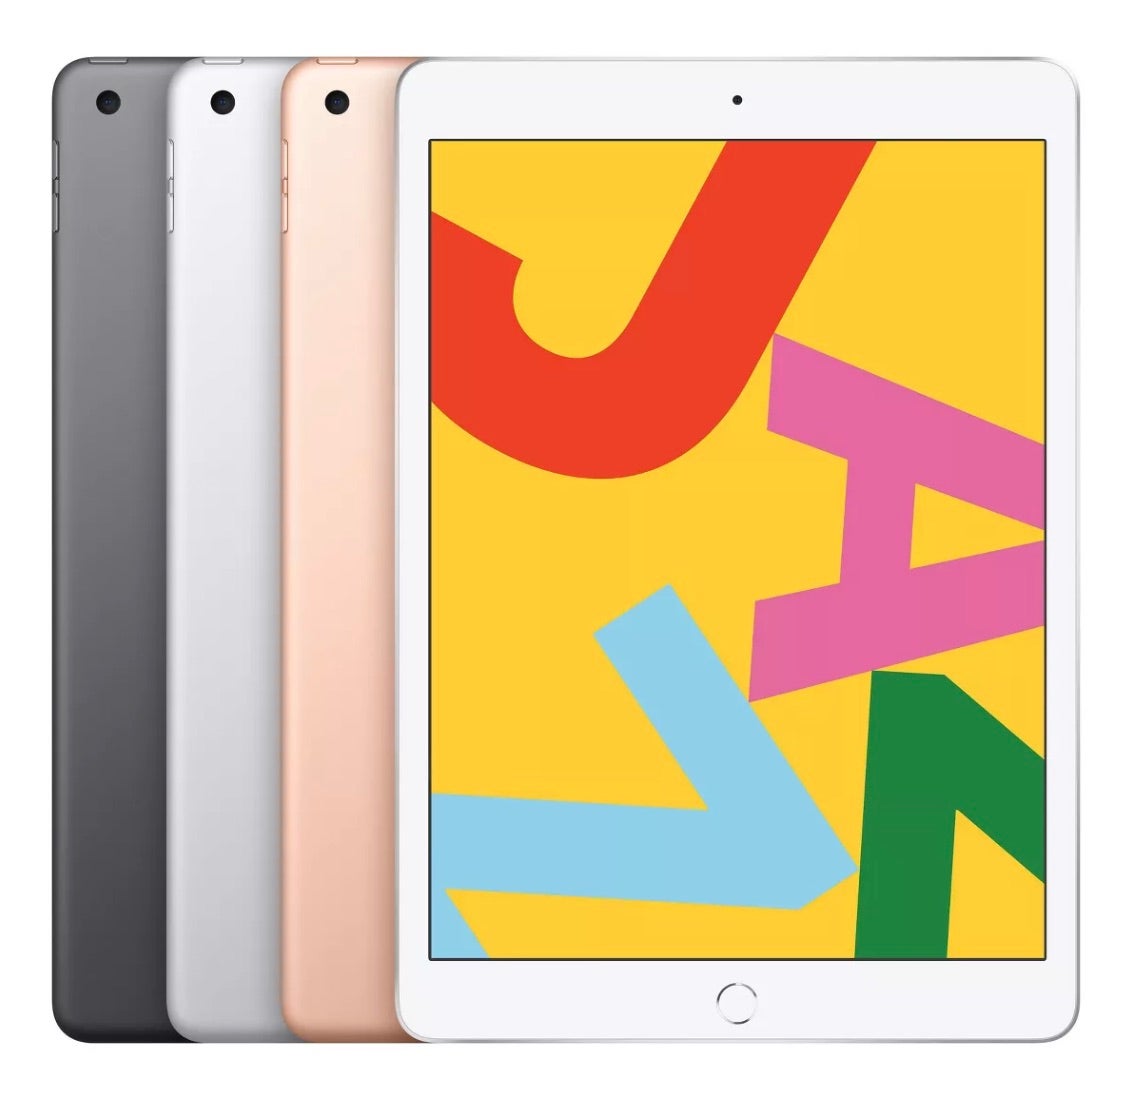 https://www.etonline.com/sites/default/files/images/2019-11/apple_ipad_10.2-inch_wi-fi_only_7th_generation.jpg